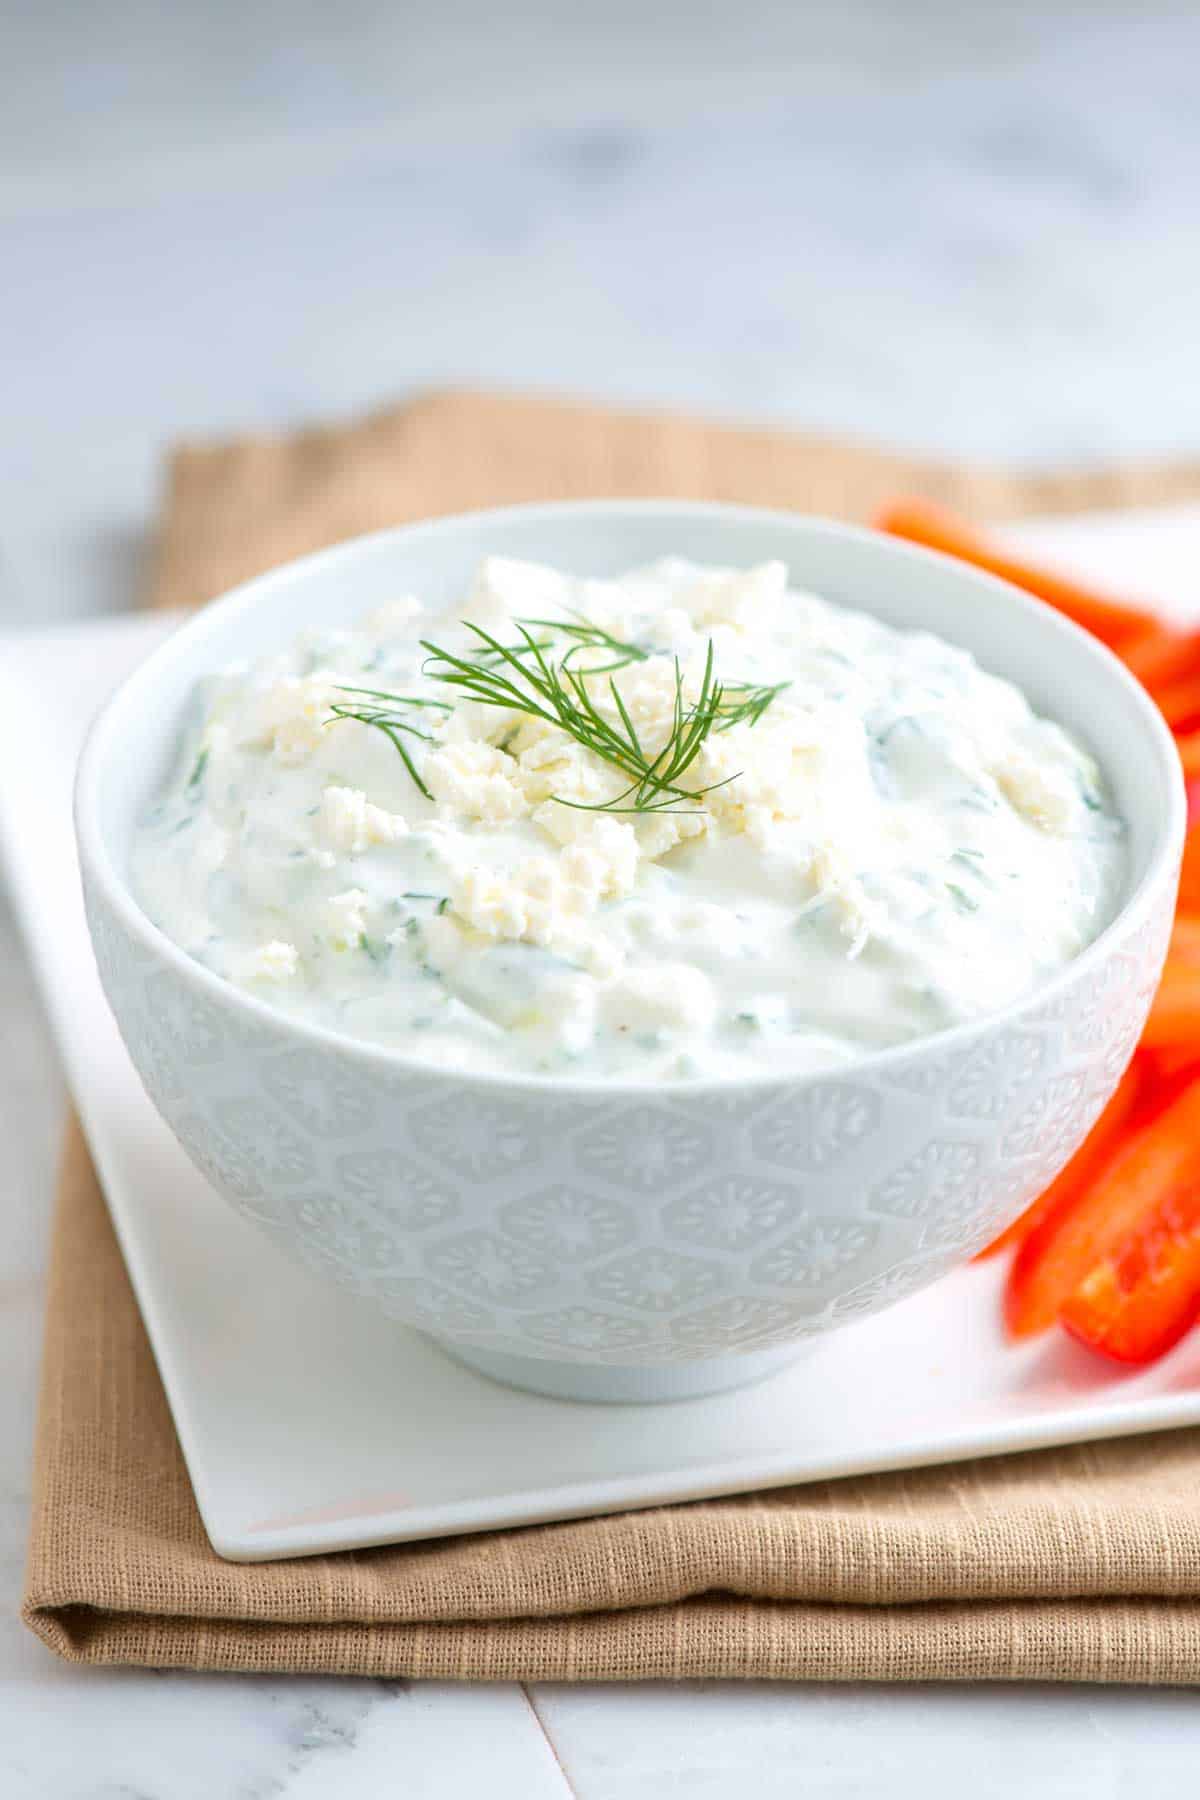 How to Make the Best Tzatziki